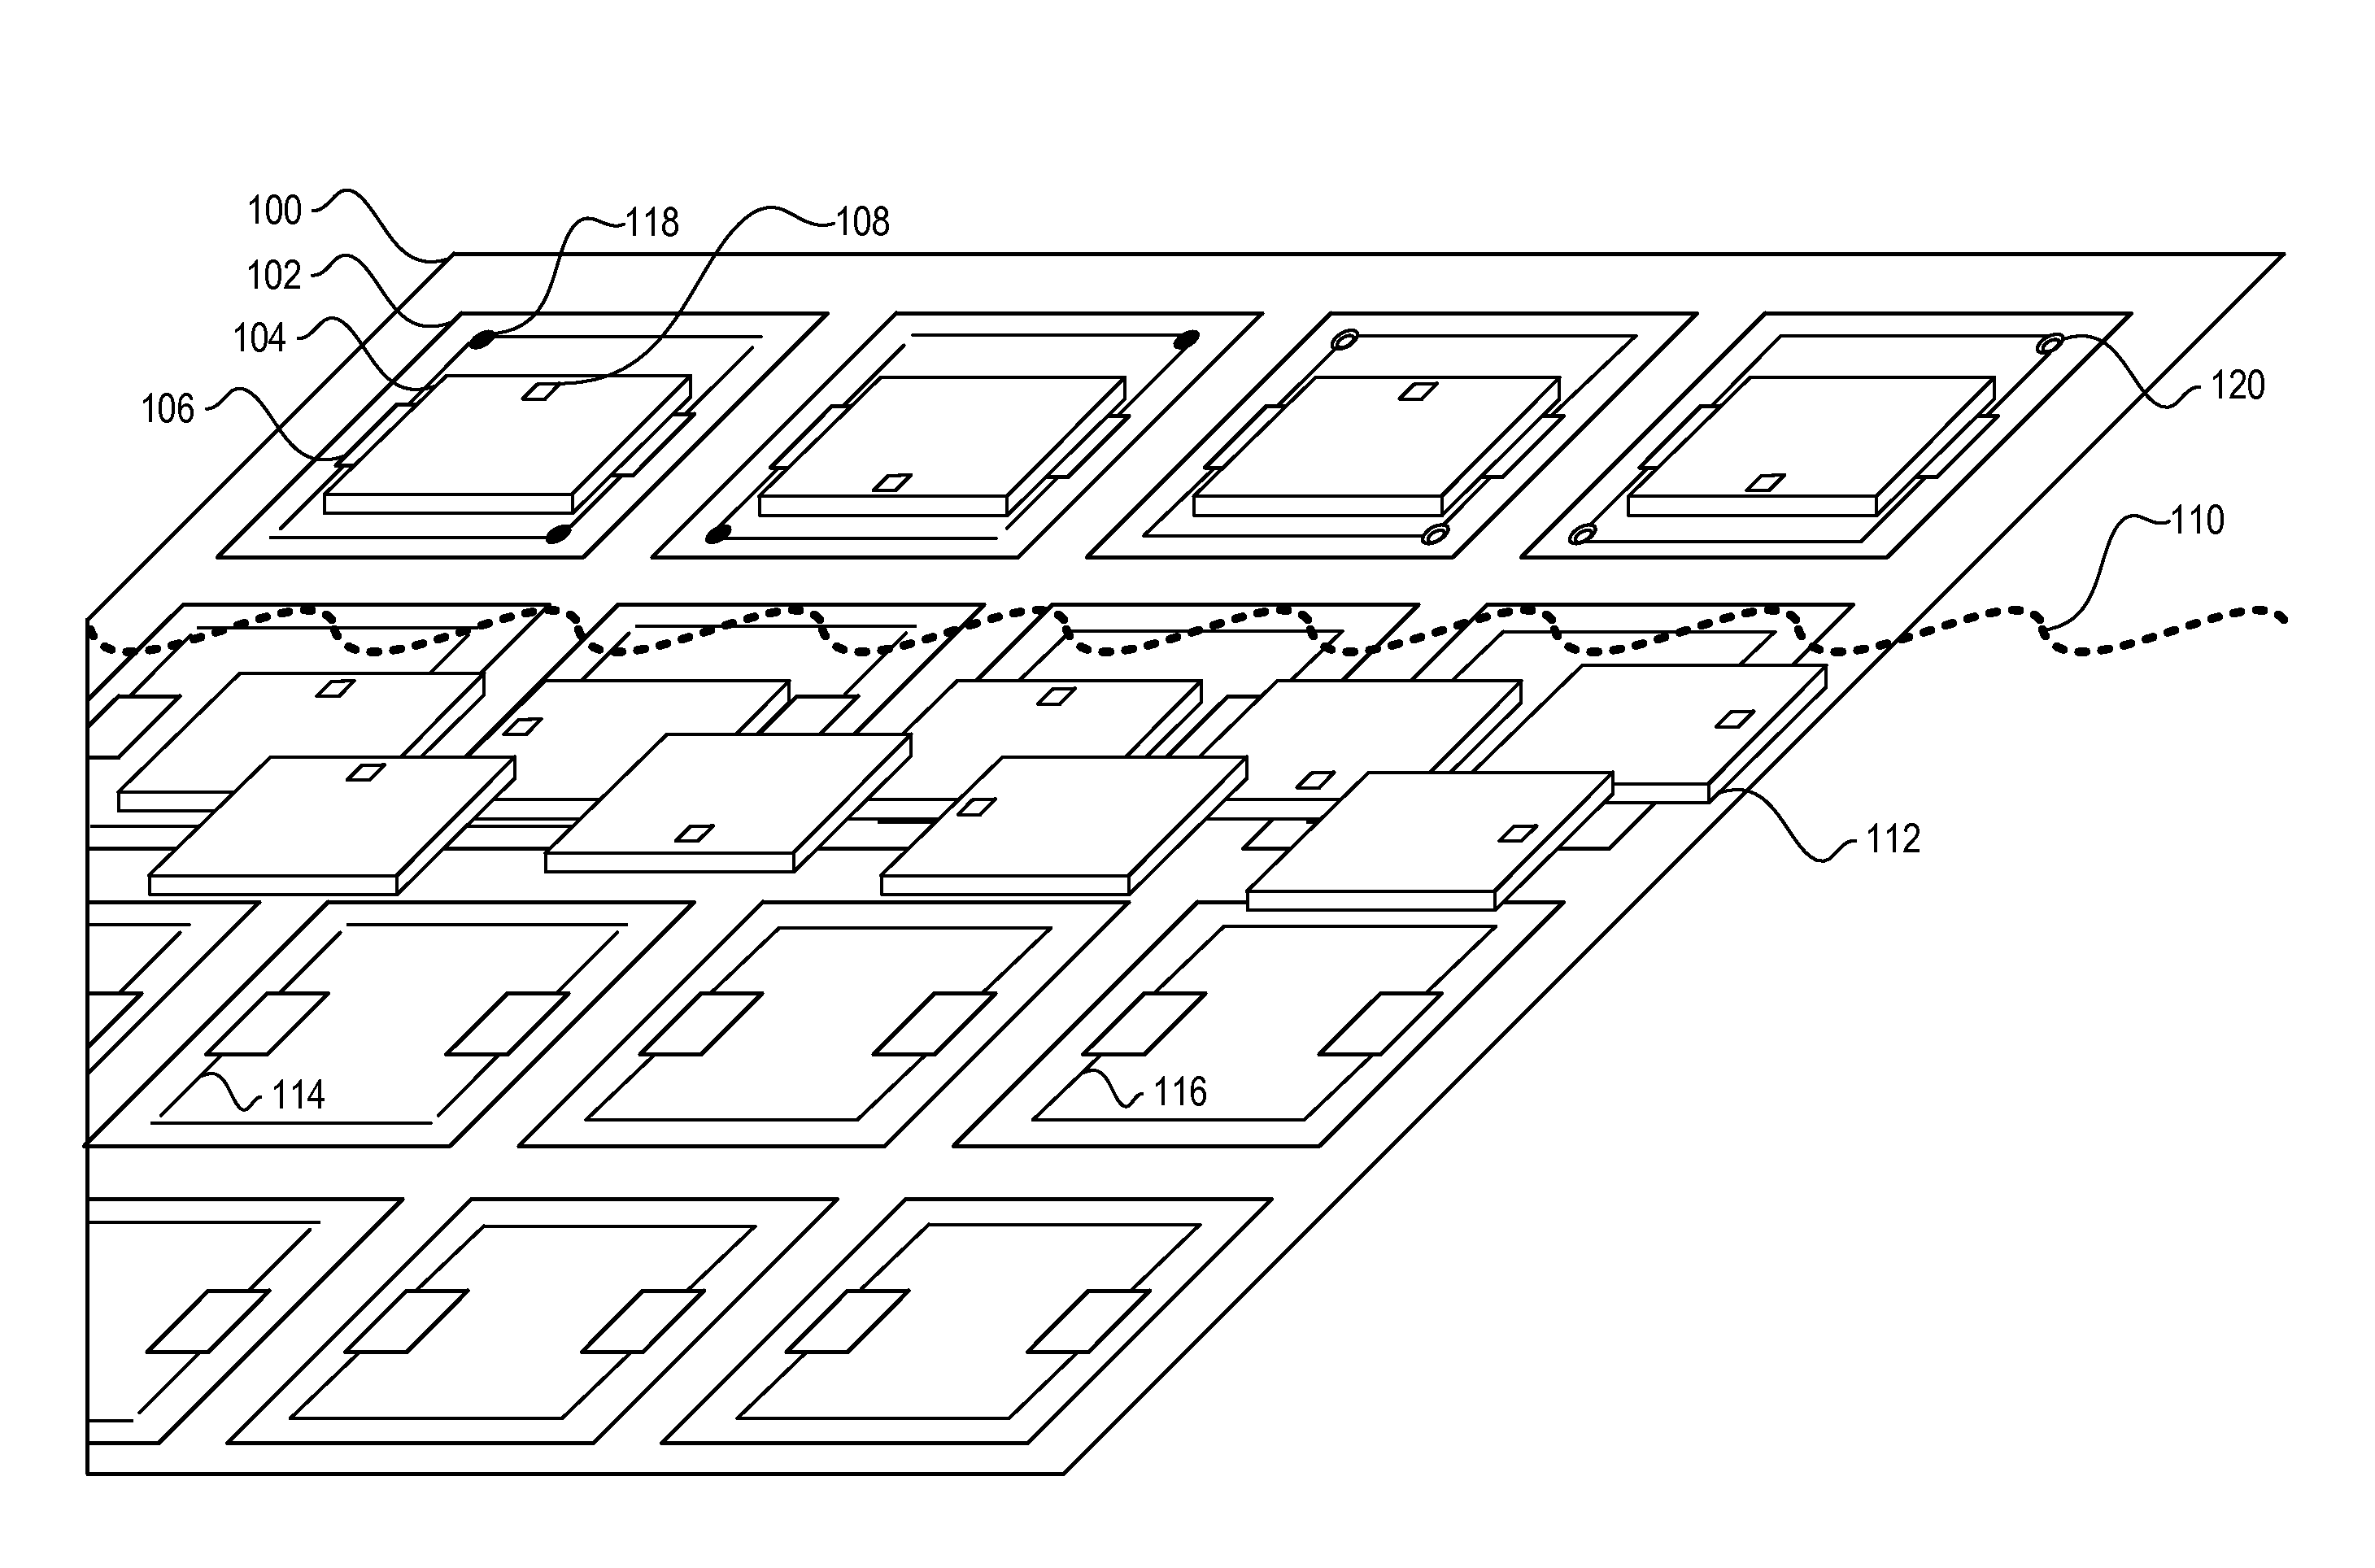 Circuitry configurable based on device orientation